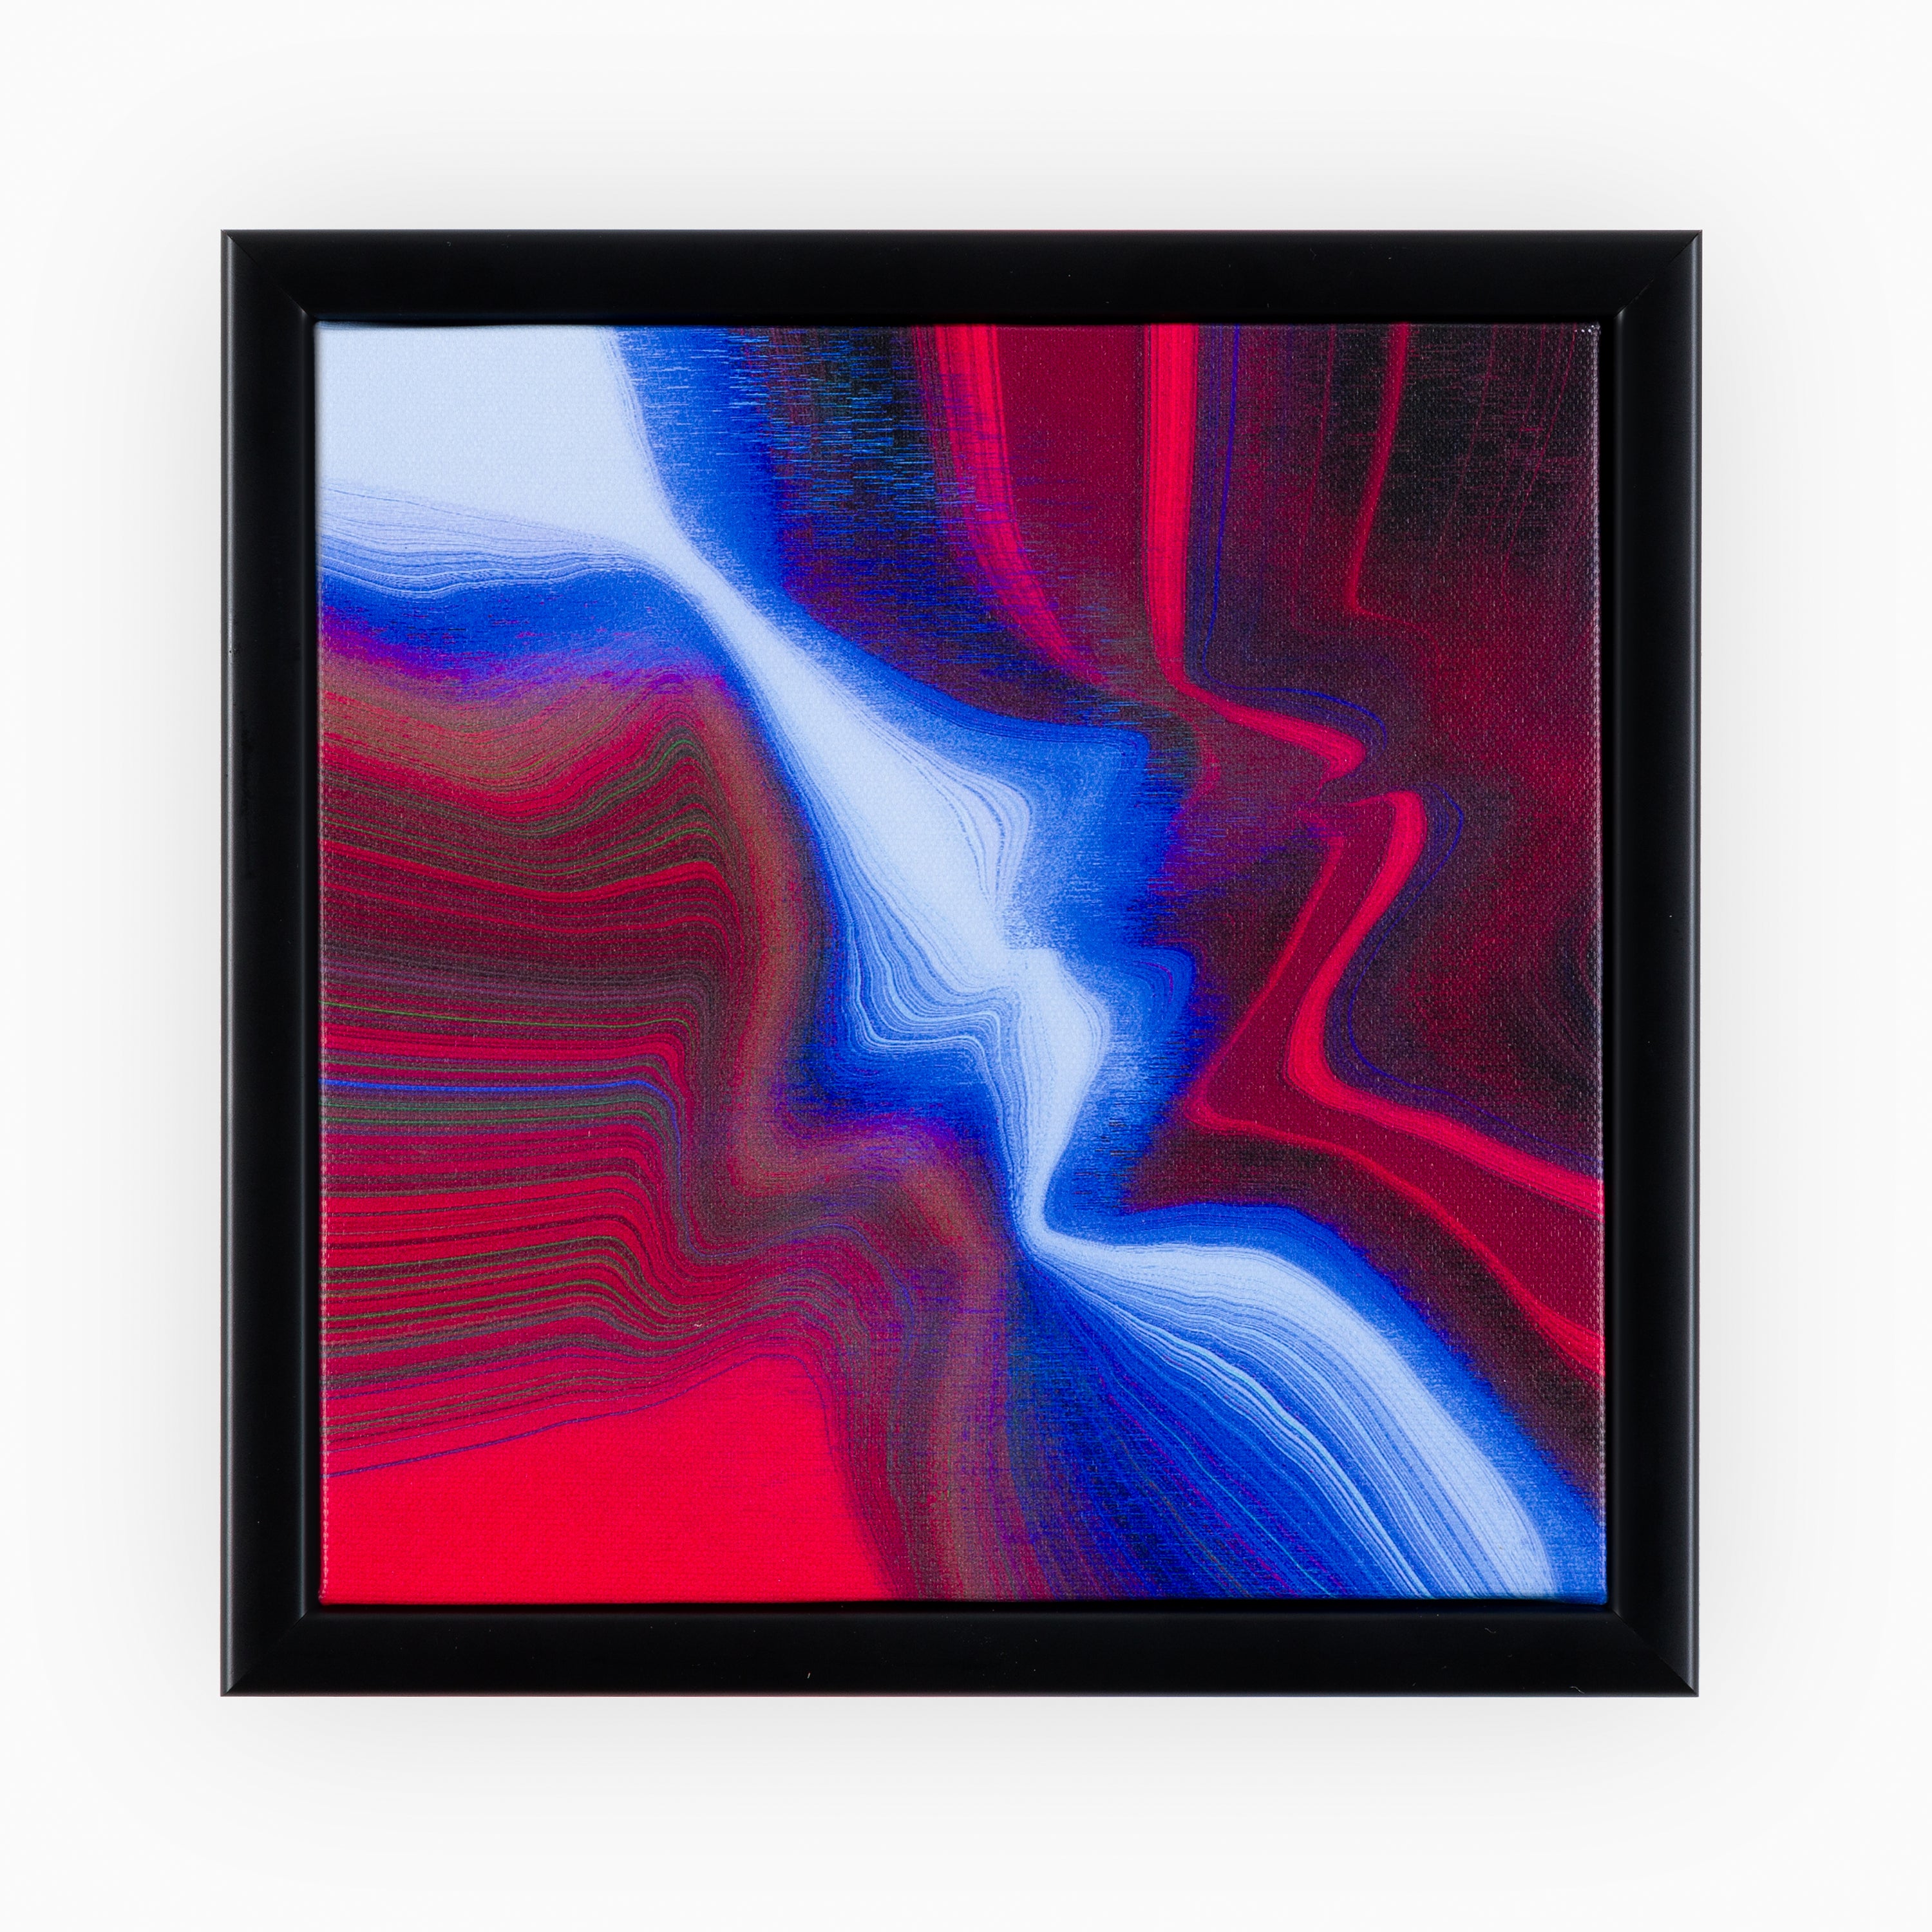 High-end abstract canvas art featuring fluid waves of deep red and vivid blue, creating a dynamic contrast, all set within a bold black frame.